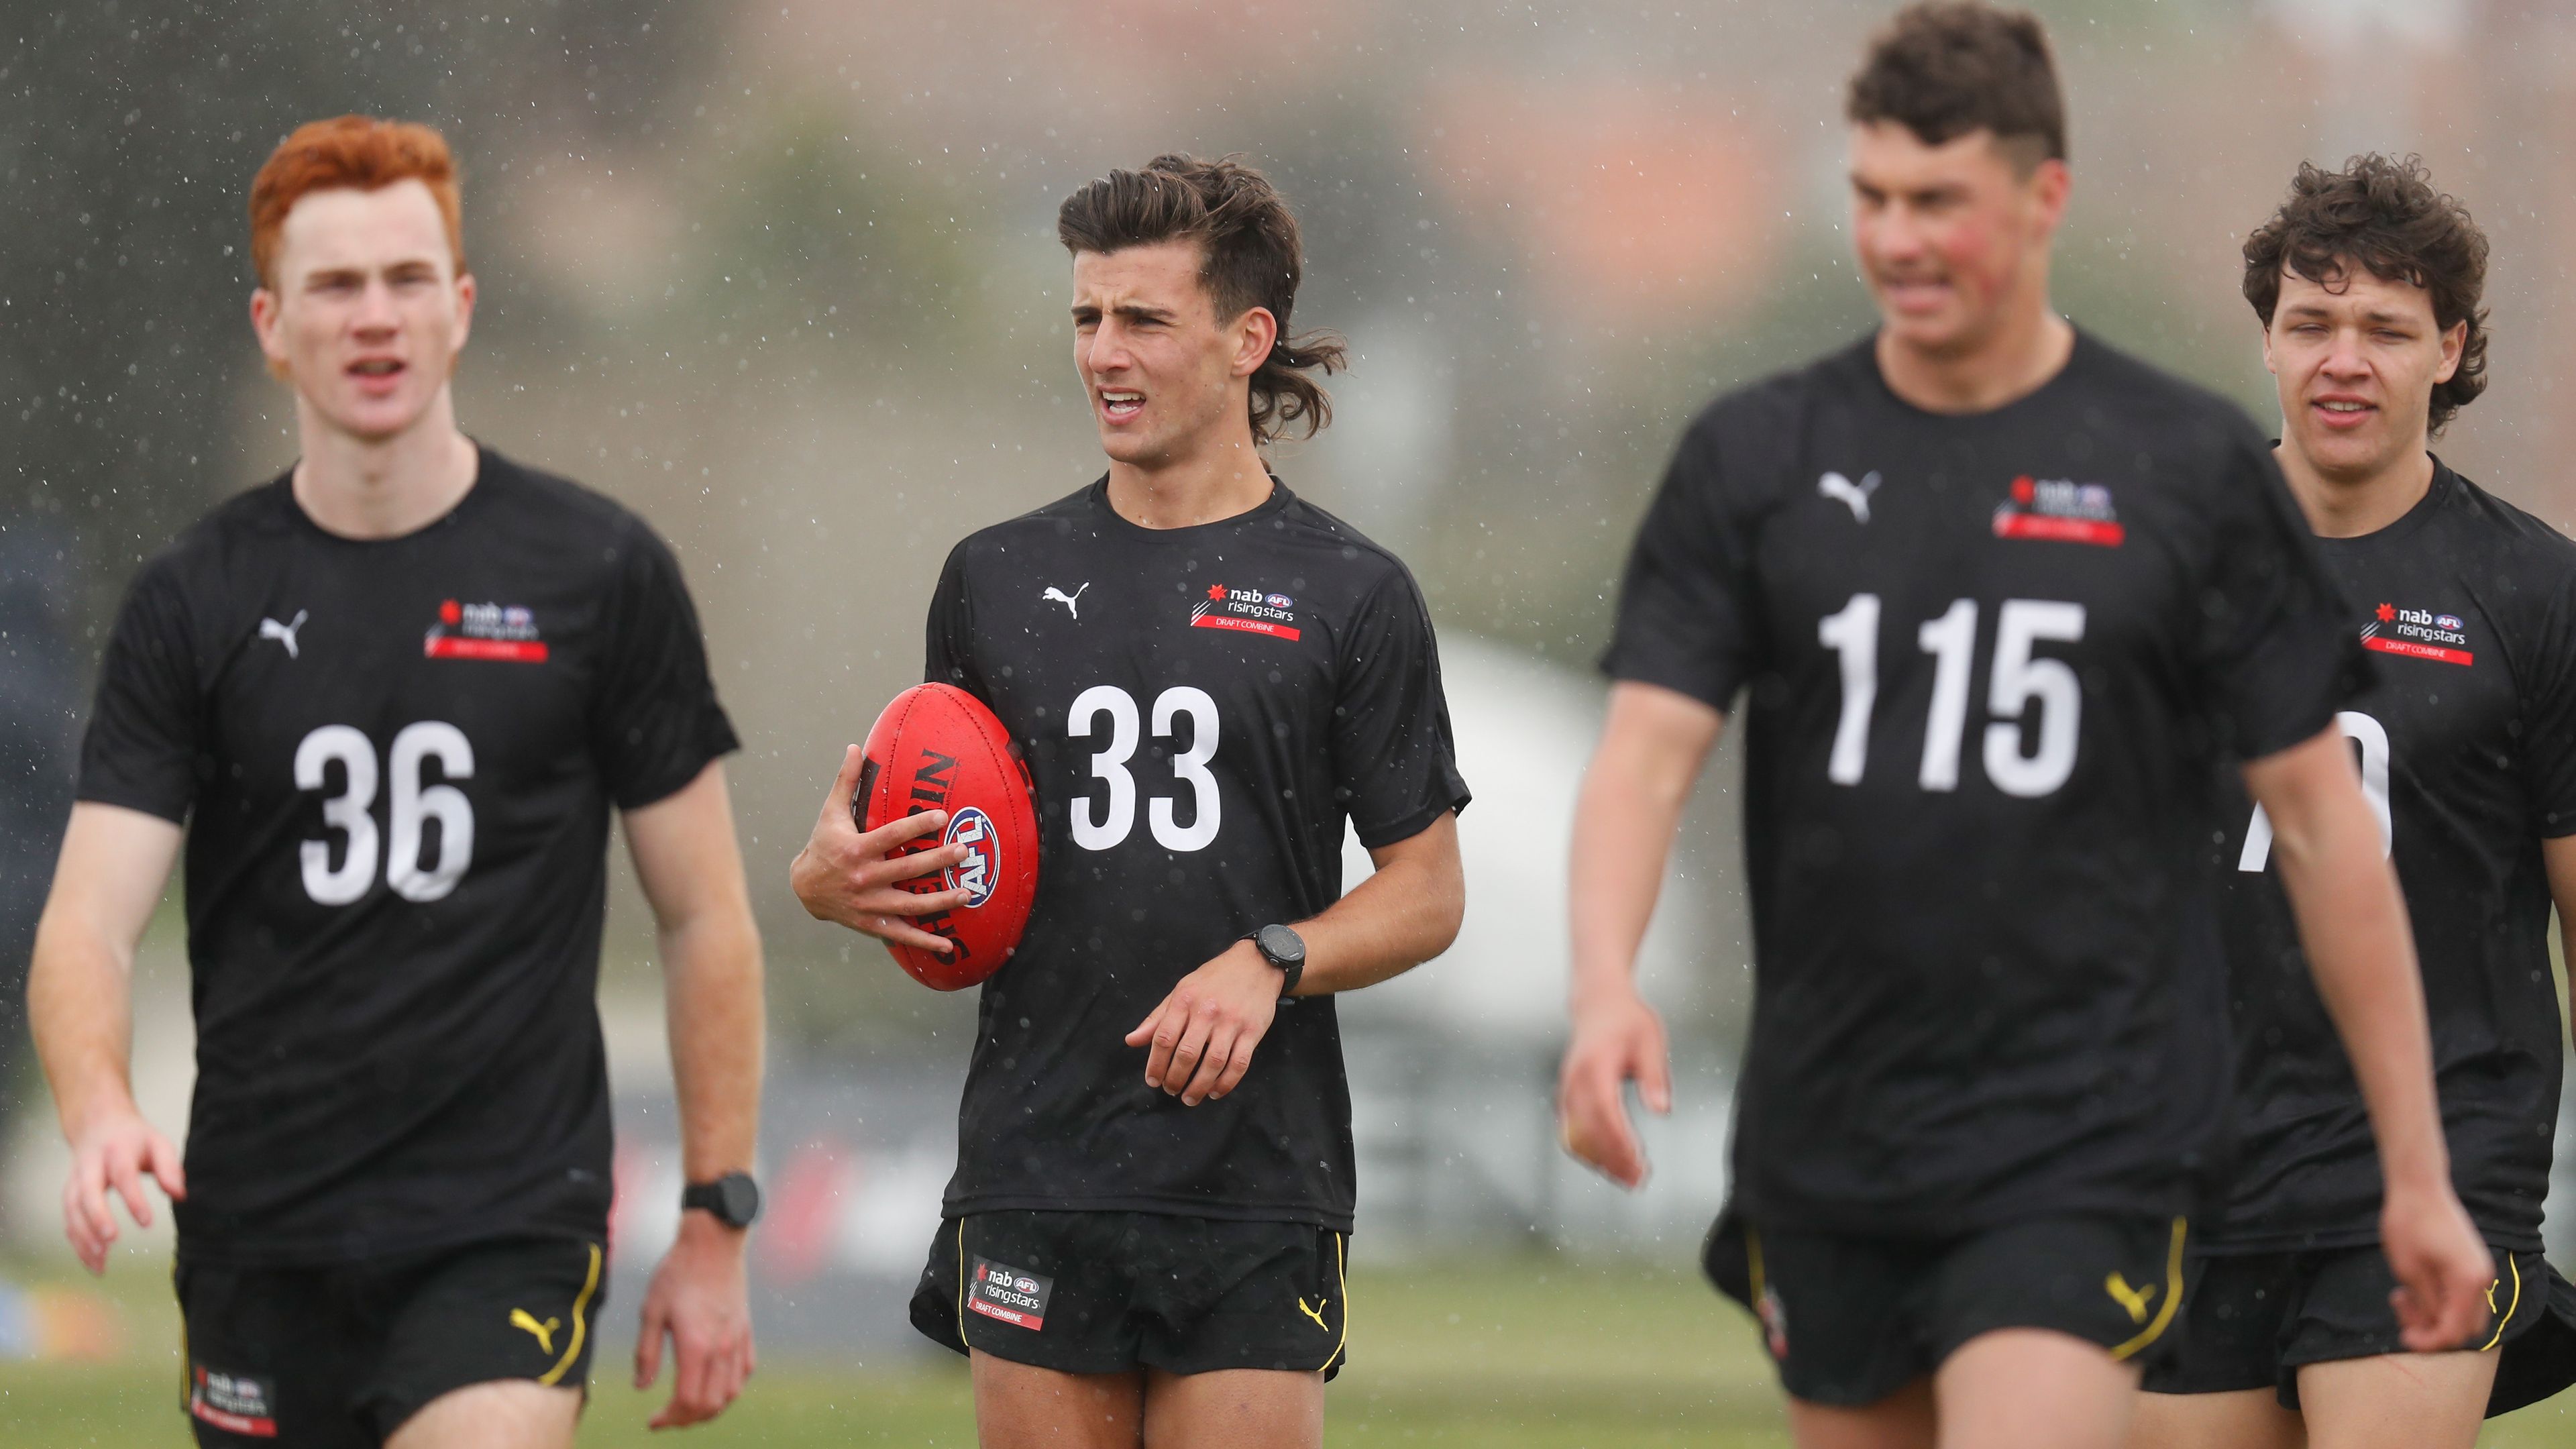 The AFL's father-son rule explained: How top picks will be determined in 2021 draft